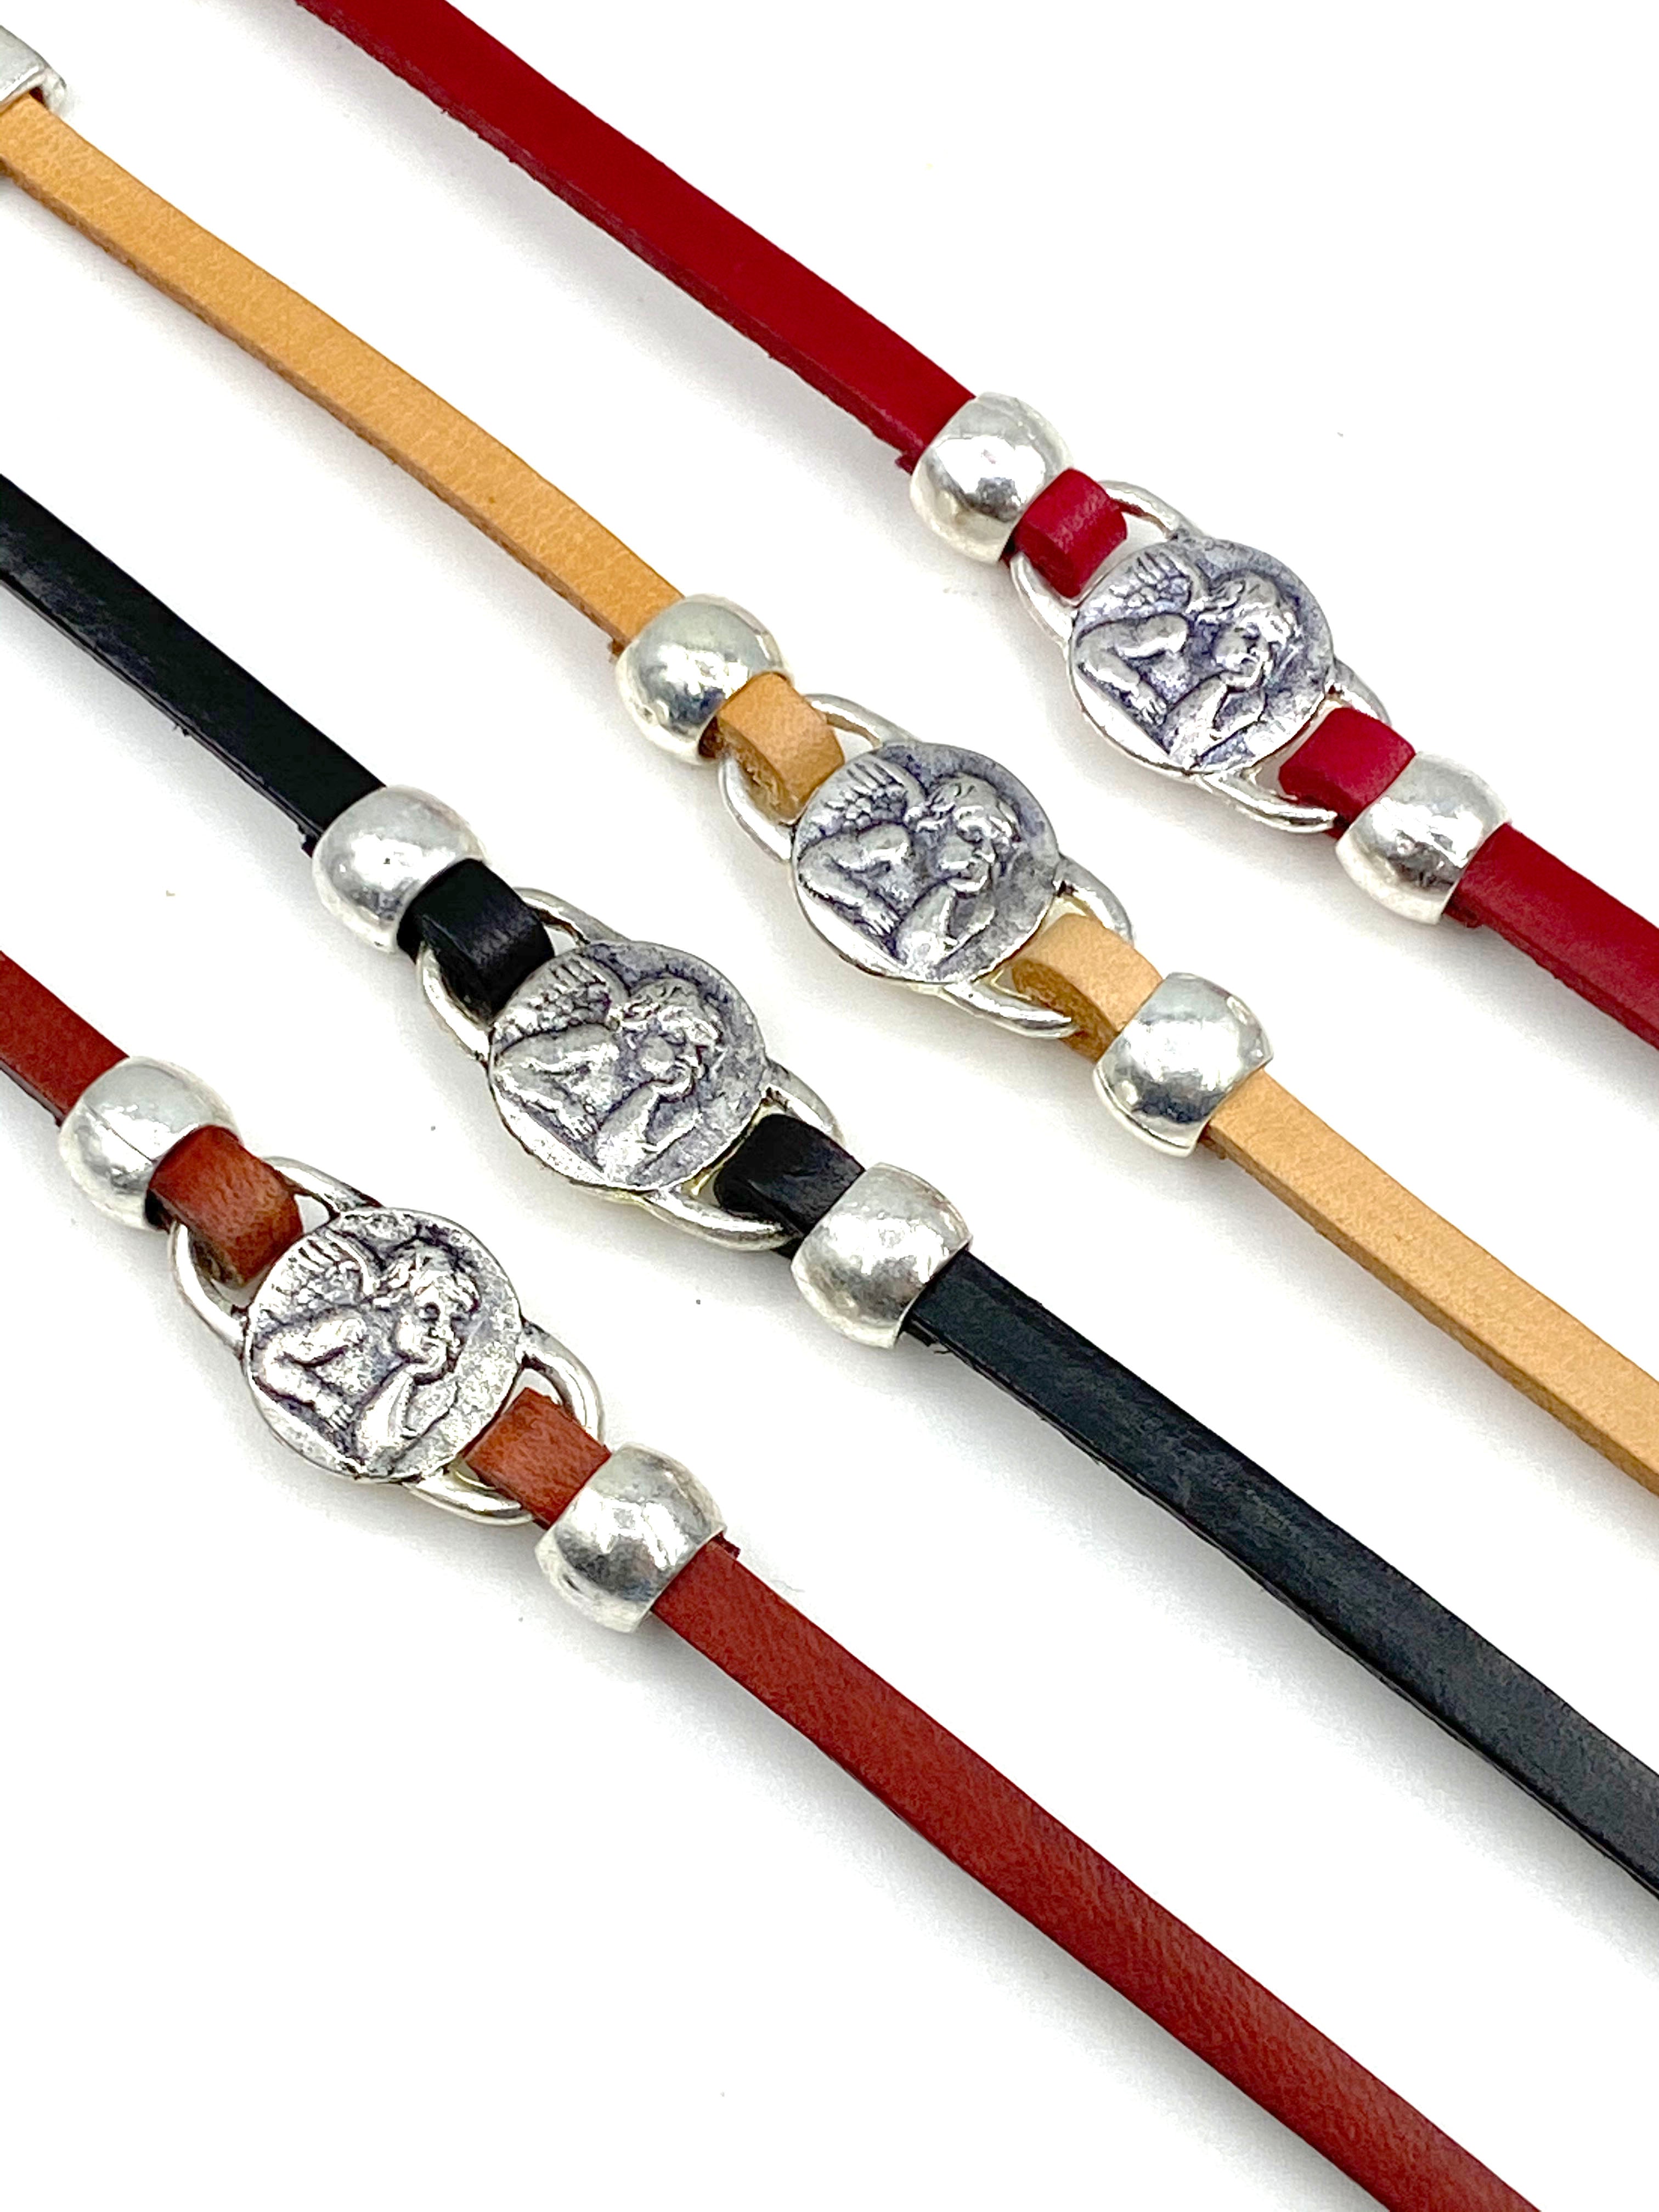 Bracelet of The Guardian Angel  handmade jewelry with Leather Straps by Graciela's Collection